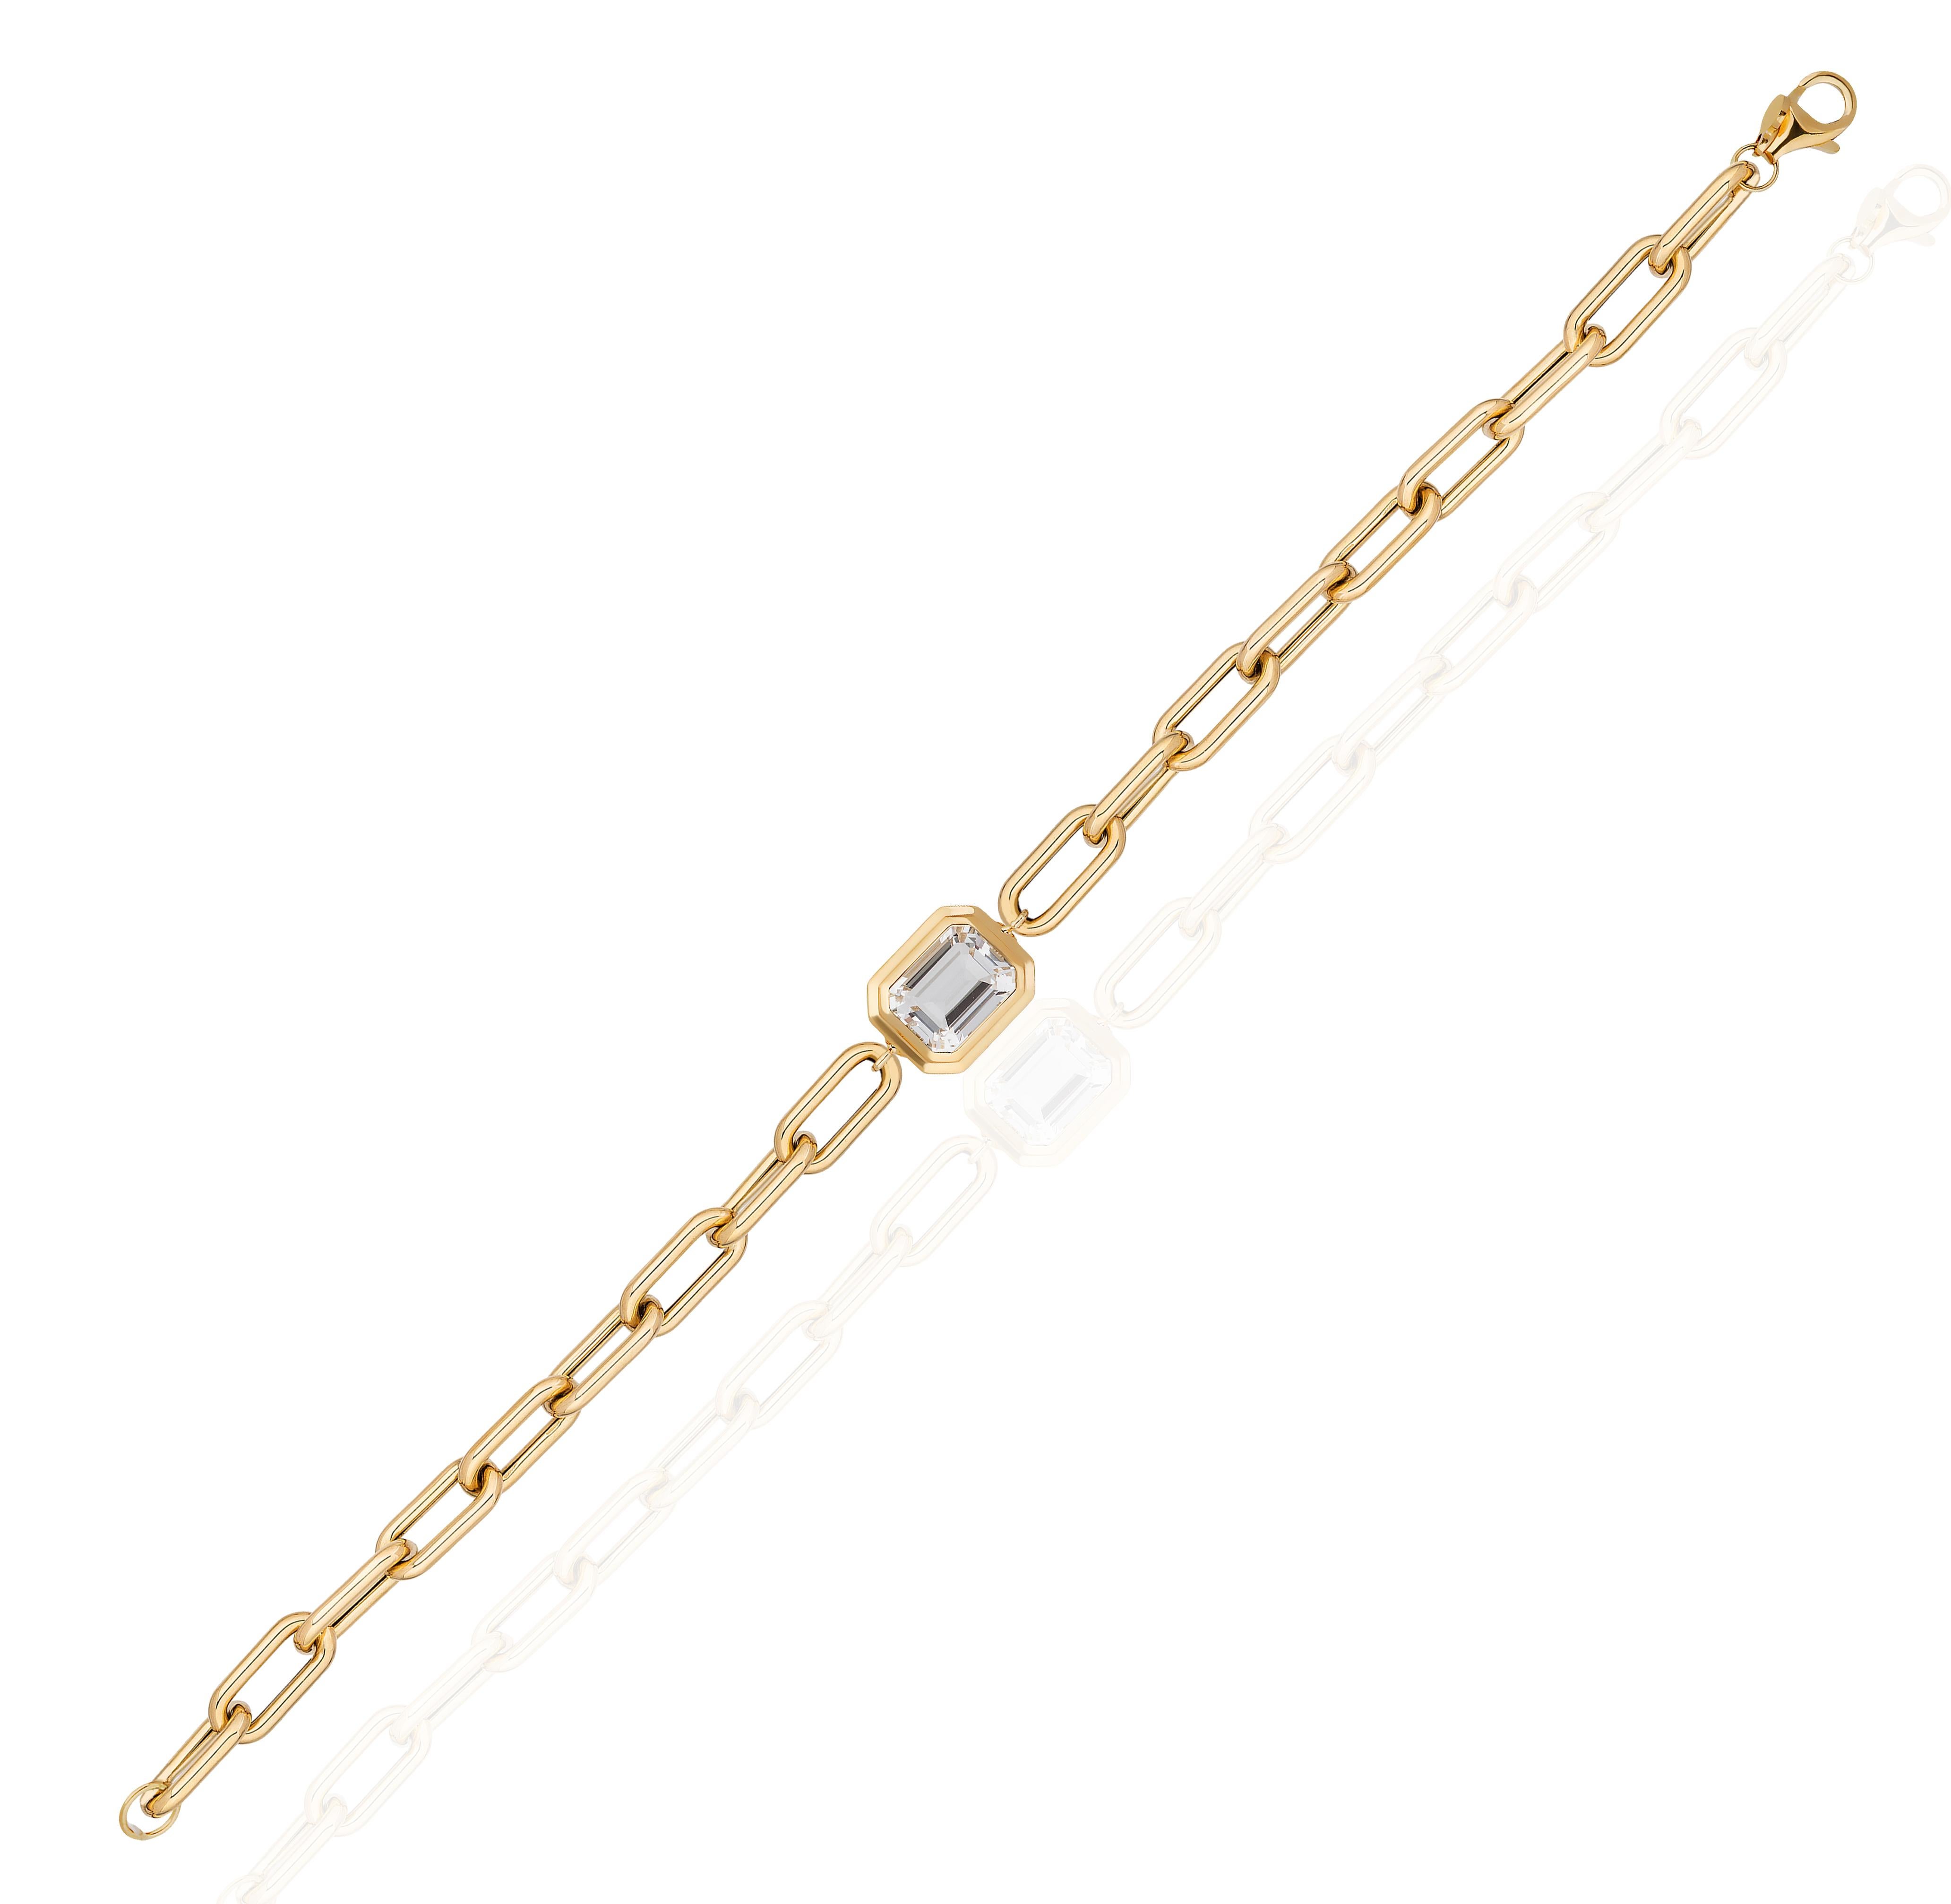 Elevate your style with the Rock Crystal Emerald Cut Bezel Set Bracelet in 18K Yellow Gold from our captivating 'Manhattan' Collection. Merging minimalist elegance with confident design, this bracelet captures the essence of New York City's iconic